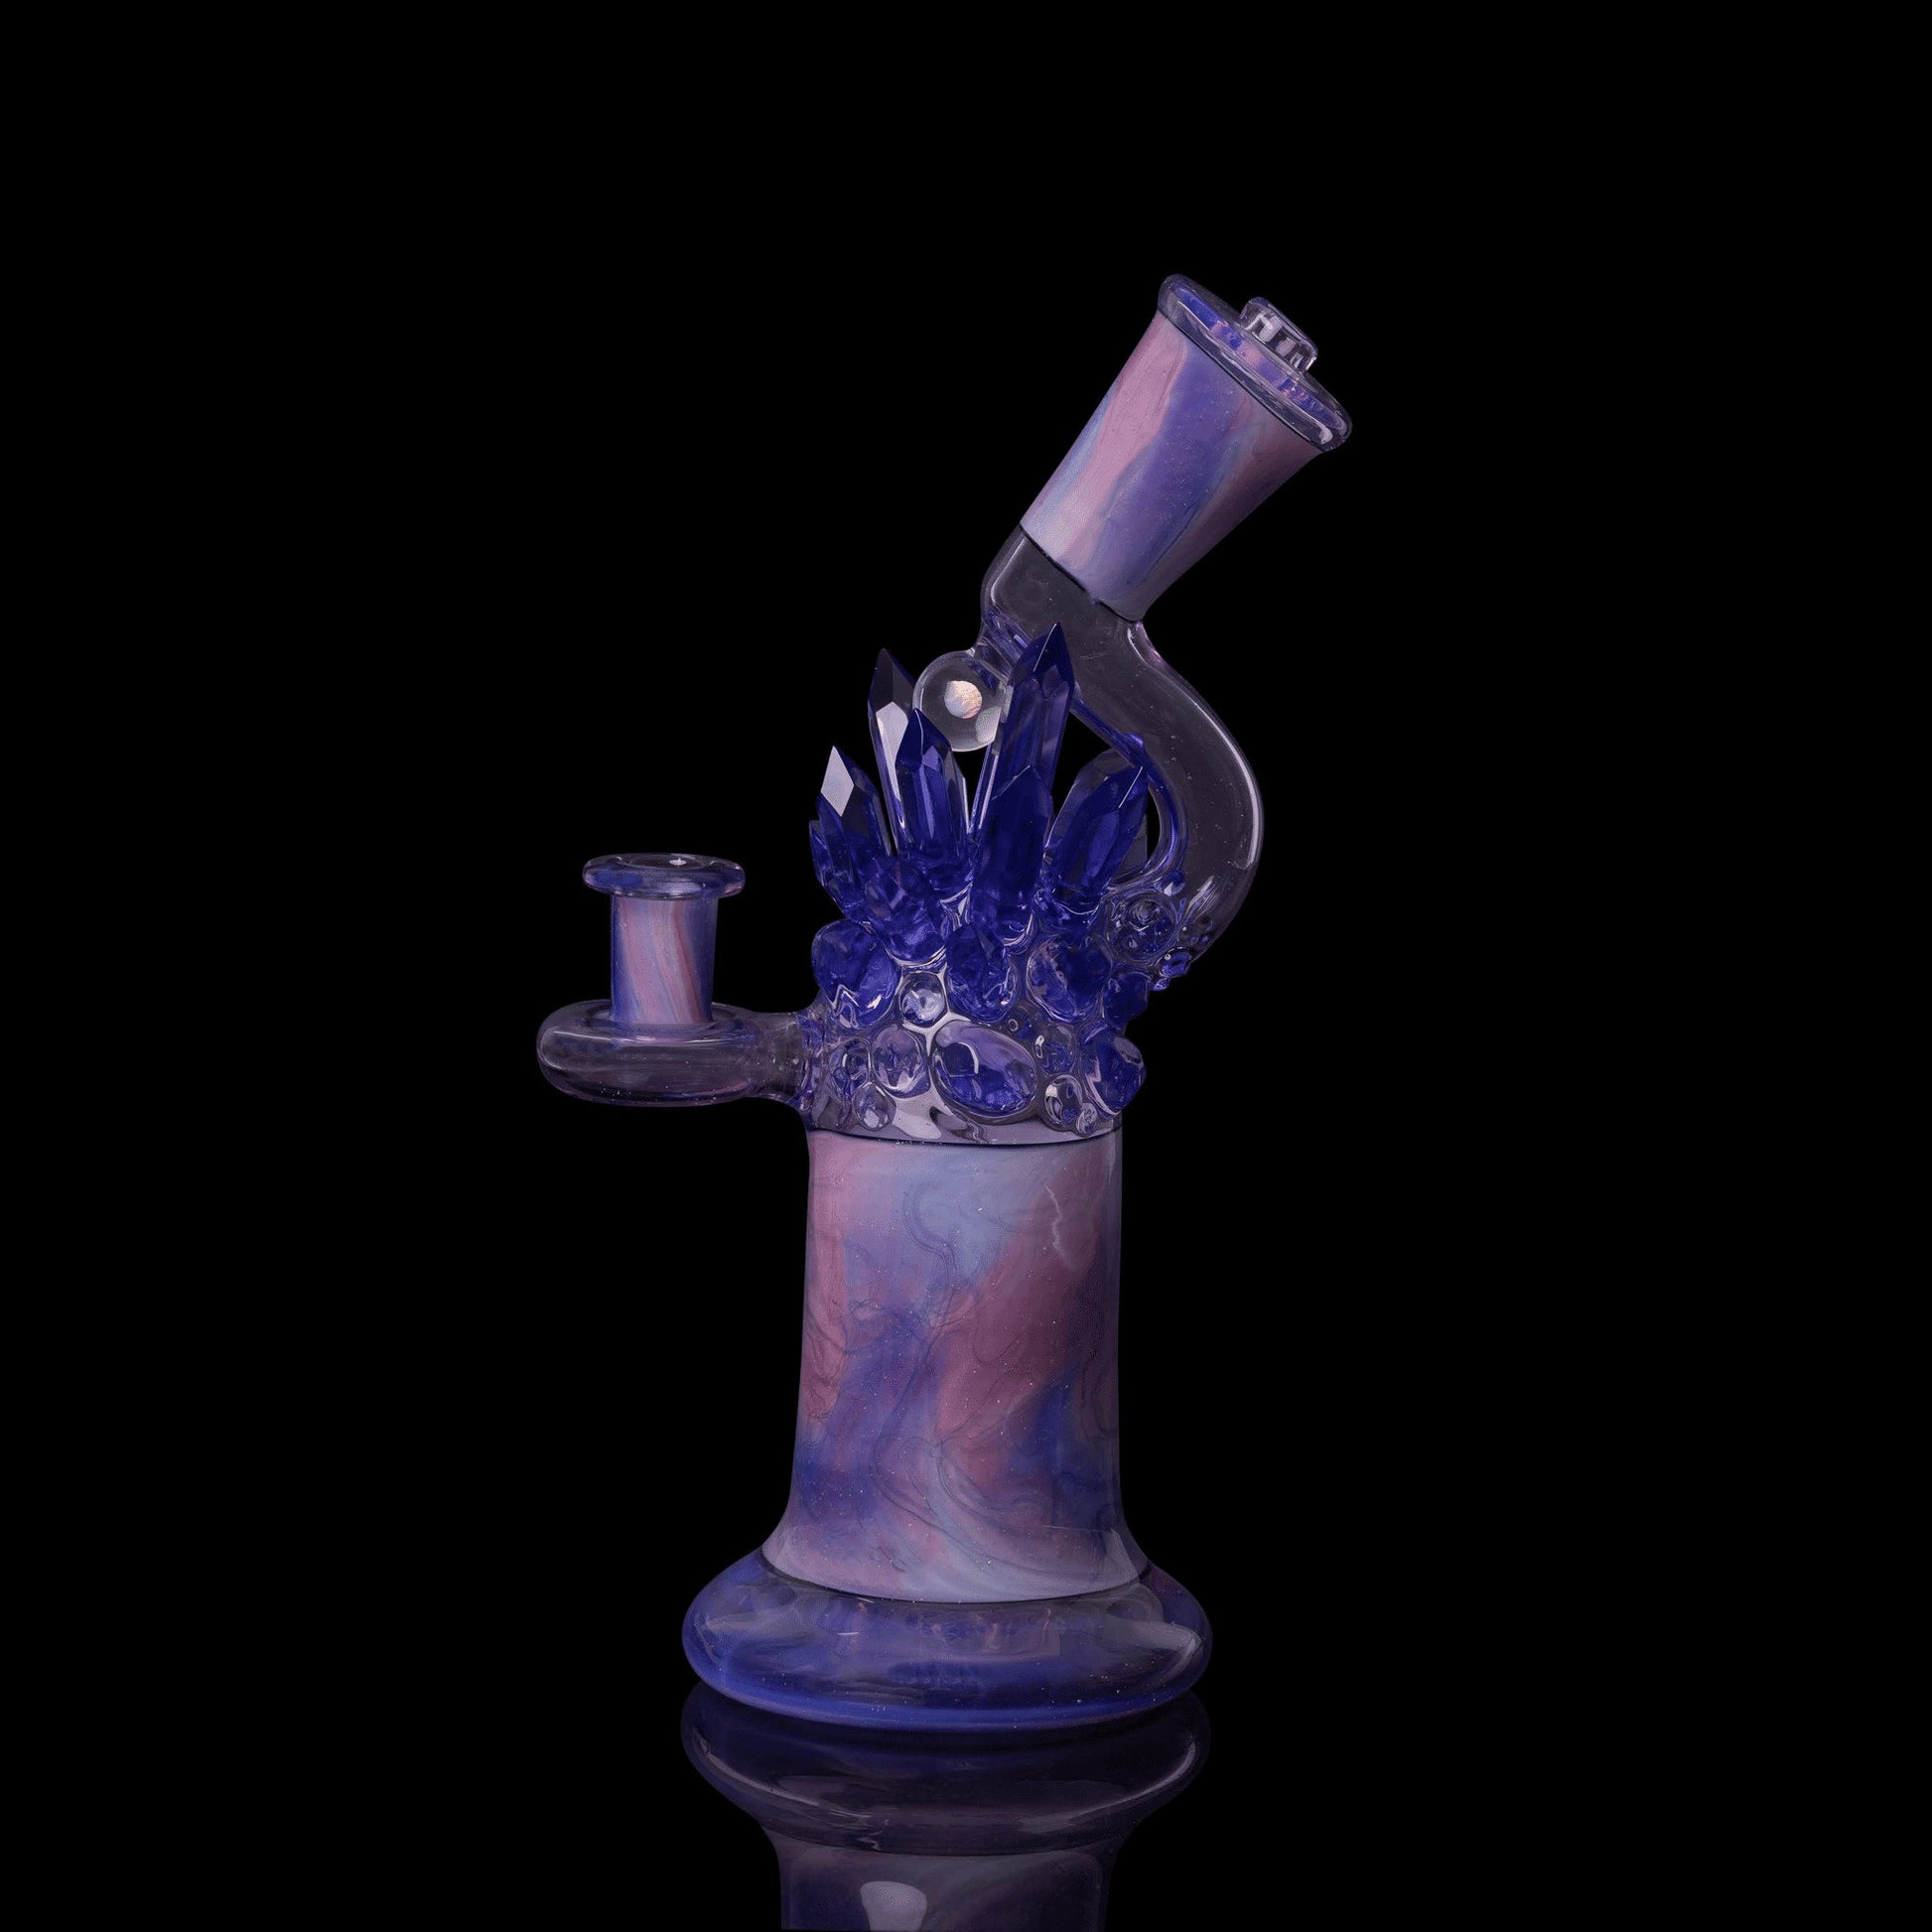 luxurious design of the Collab Rig by Northern Waters x Scomo Moanet (Scribble Season 2022)